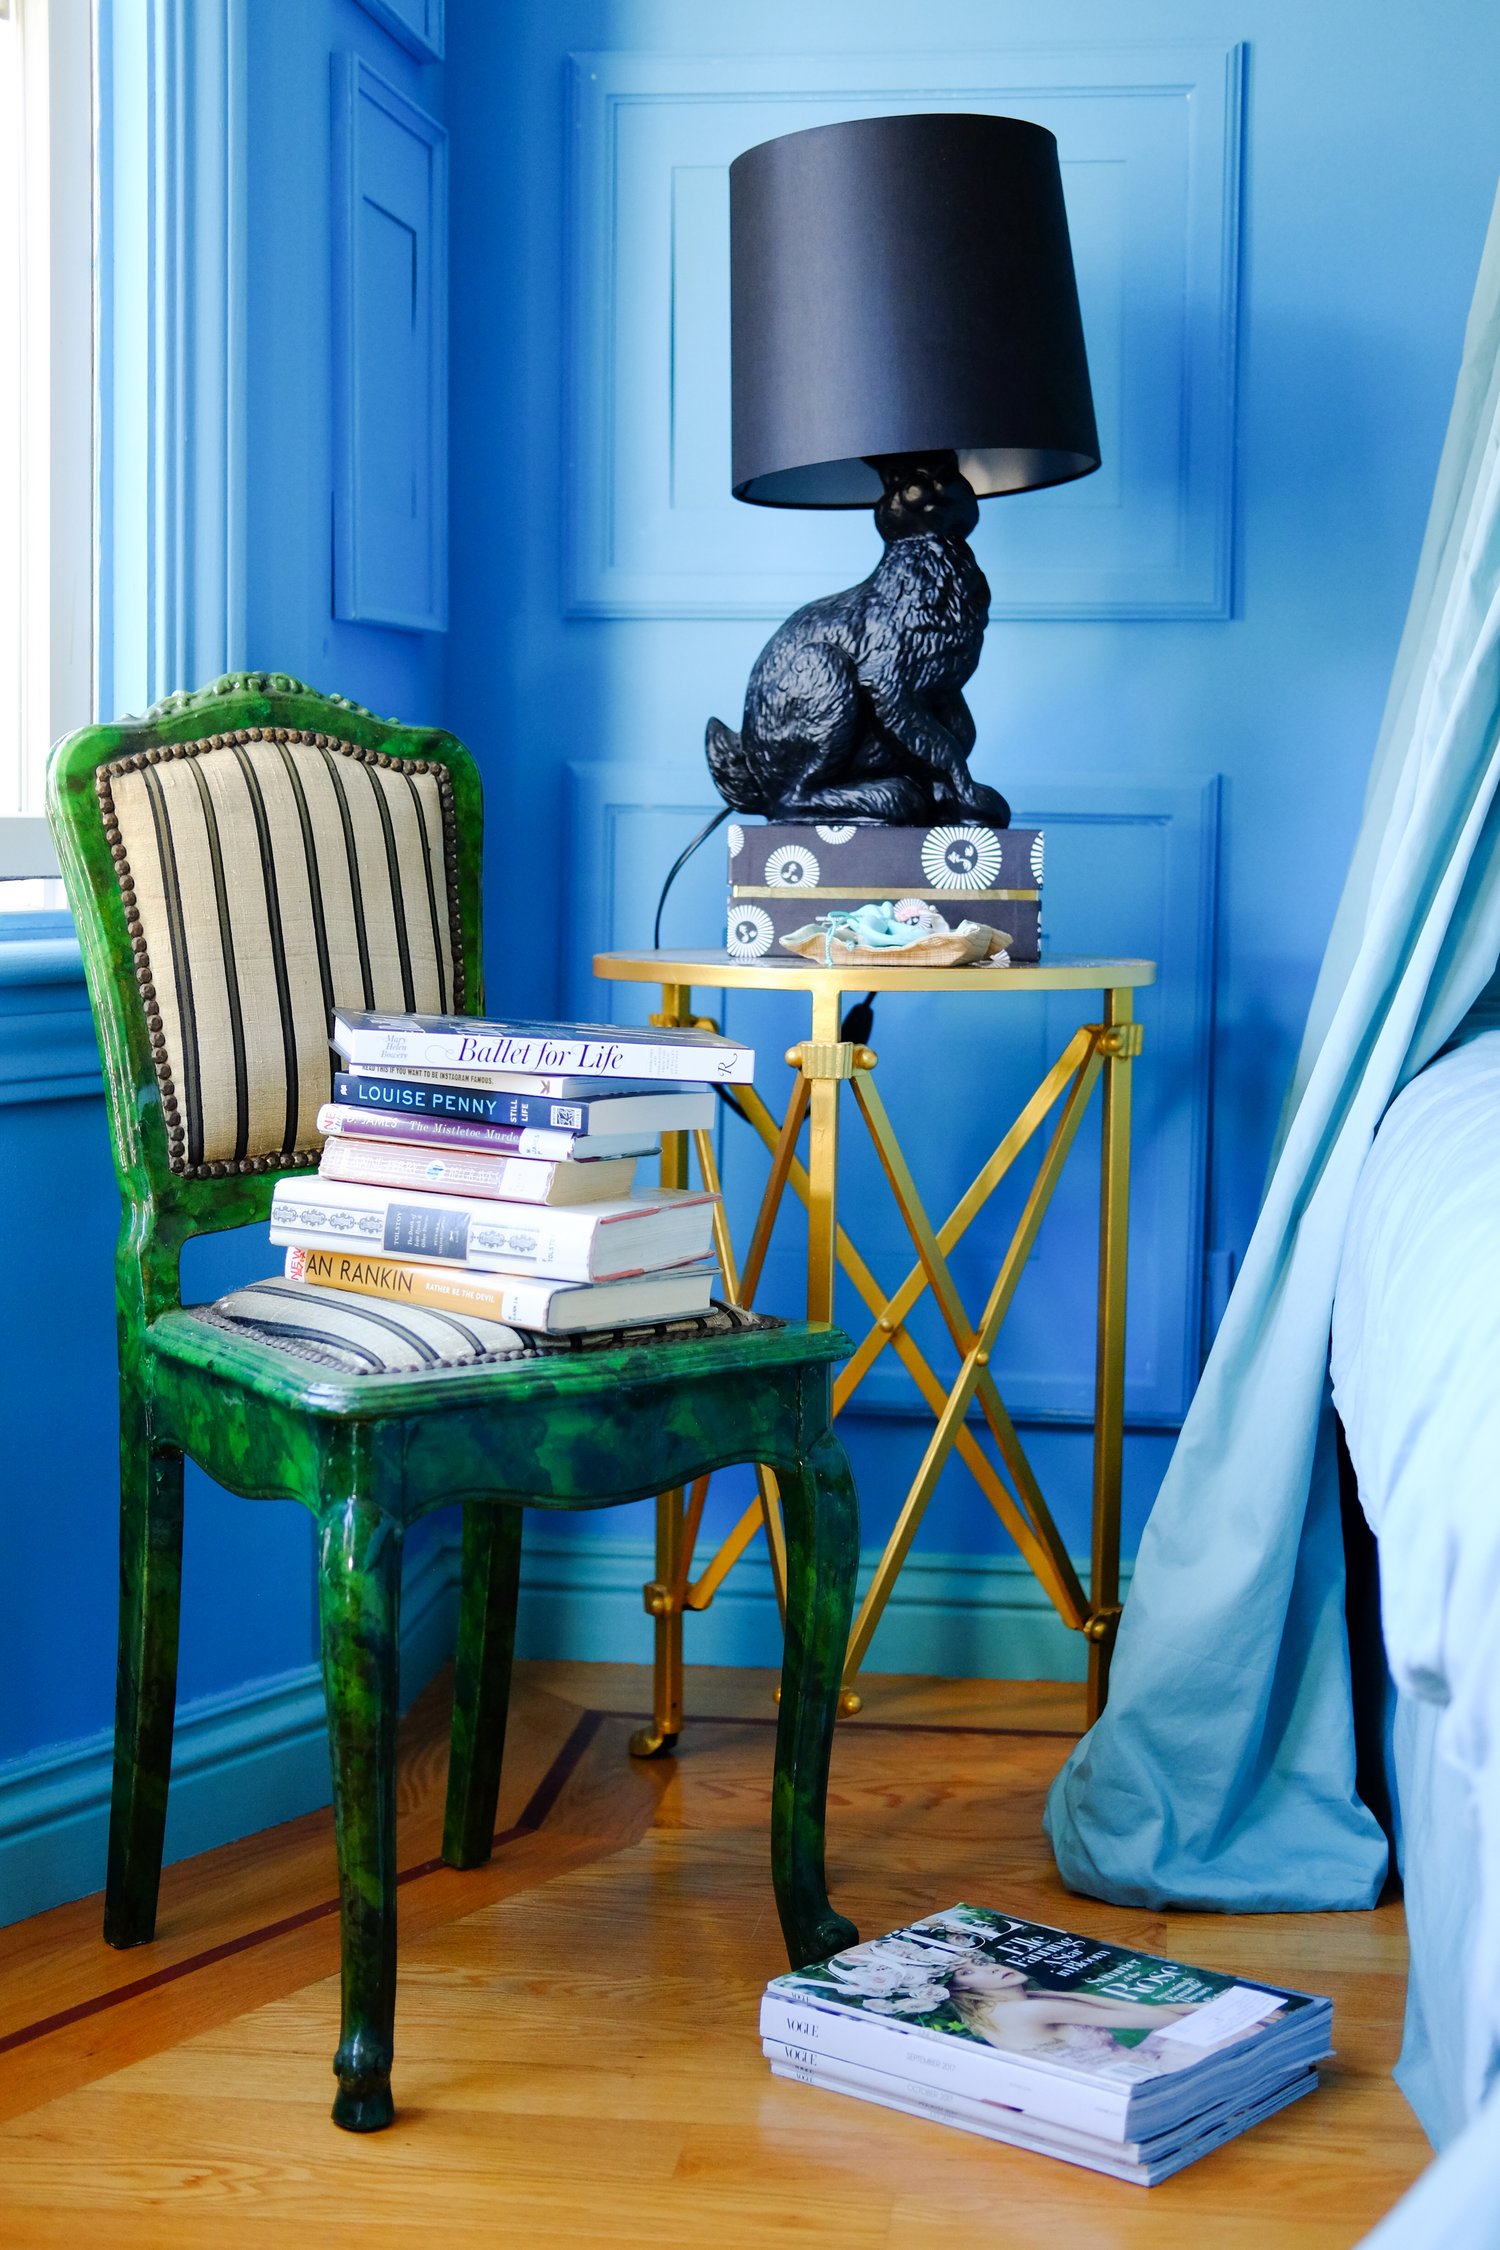 The image shows a blue-painted room with a green chair, a pile of books on it, a small gold side table with a black animal-shaped lamp, and magazines on the wooden floor.